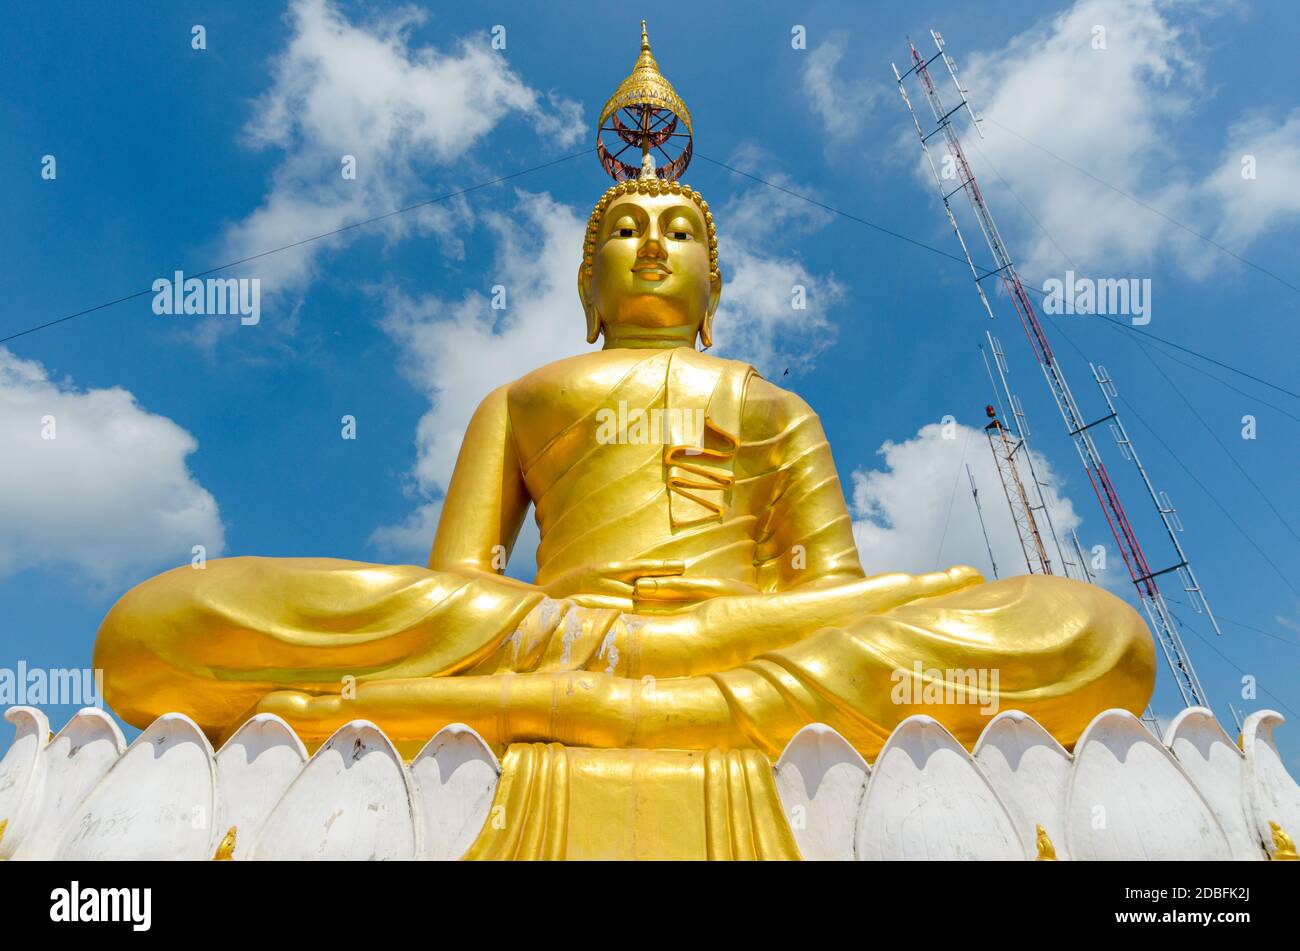 Monumental Buddha figure, gilded, with head umbrella, on top of Tiger rock near Krabi Thailand, and radion antenna in background. Stock Photo